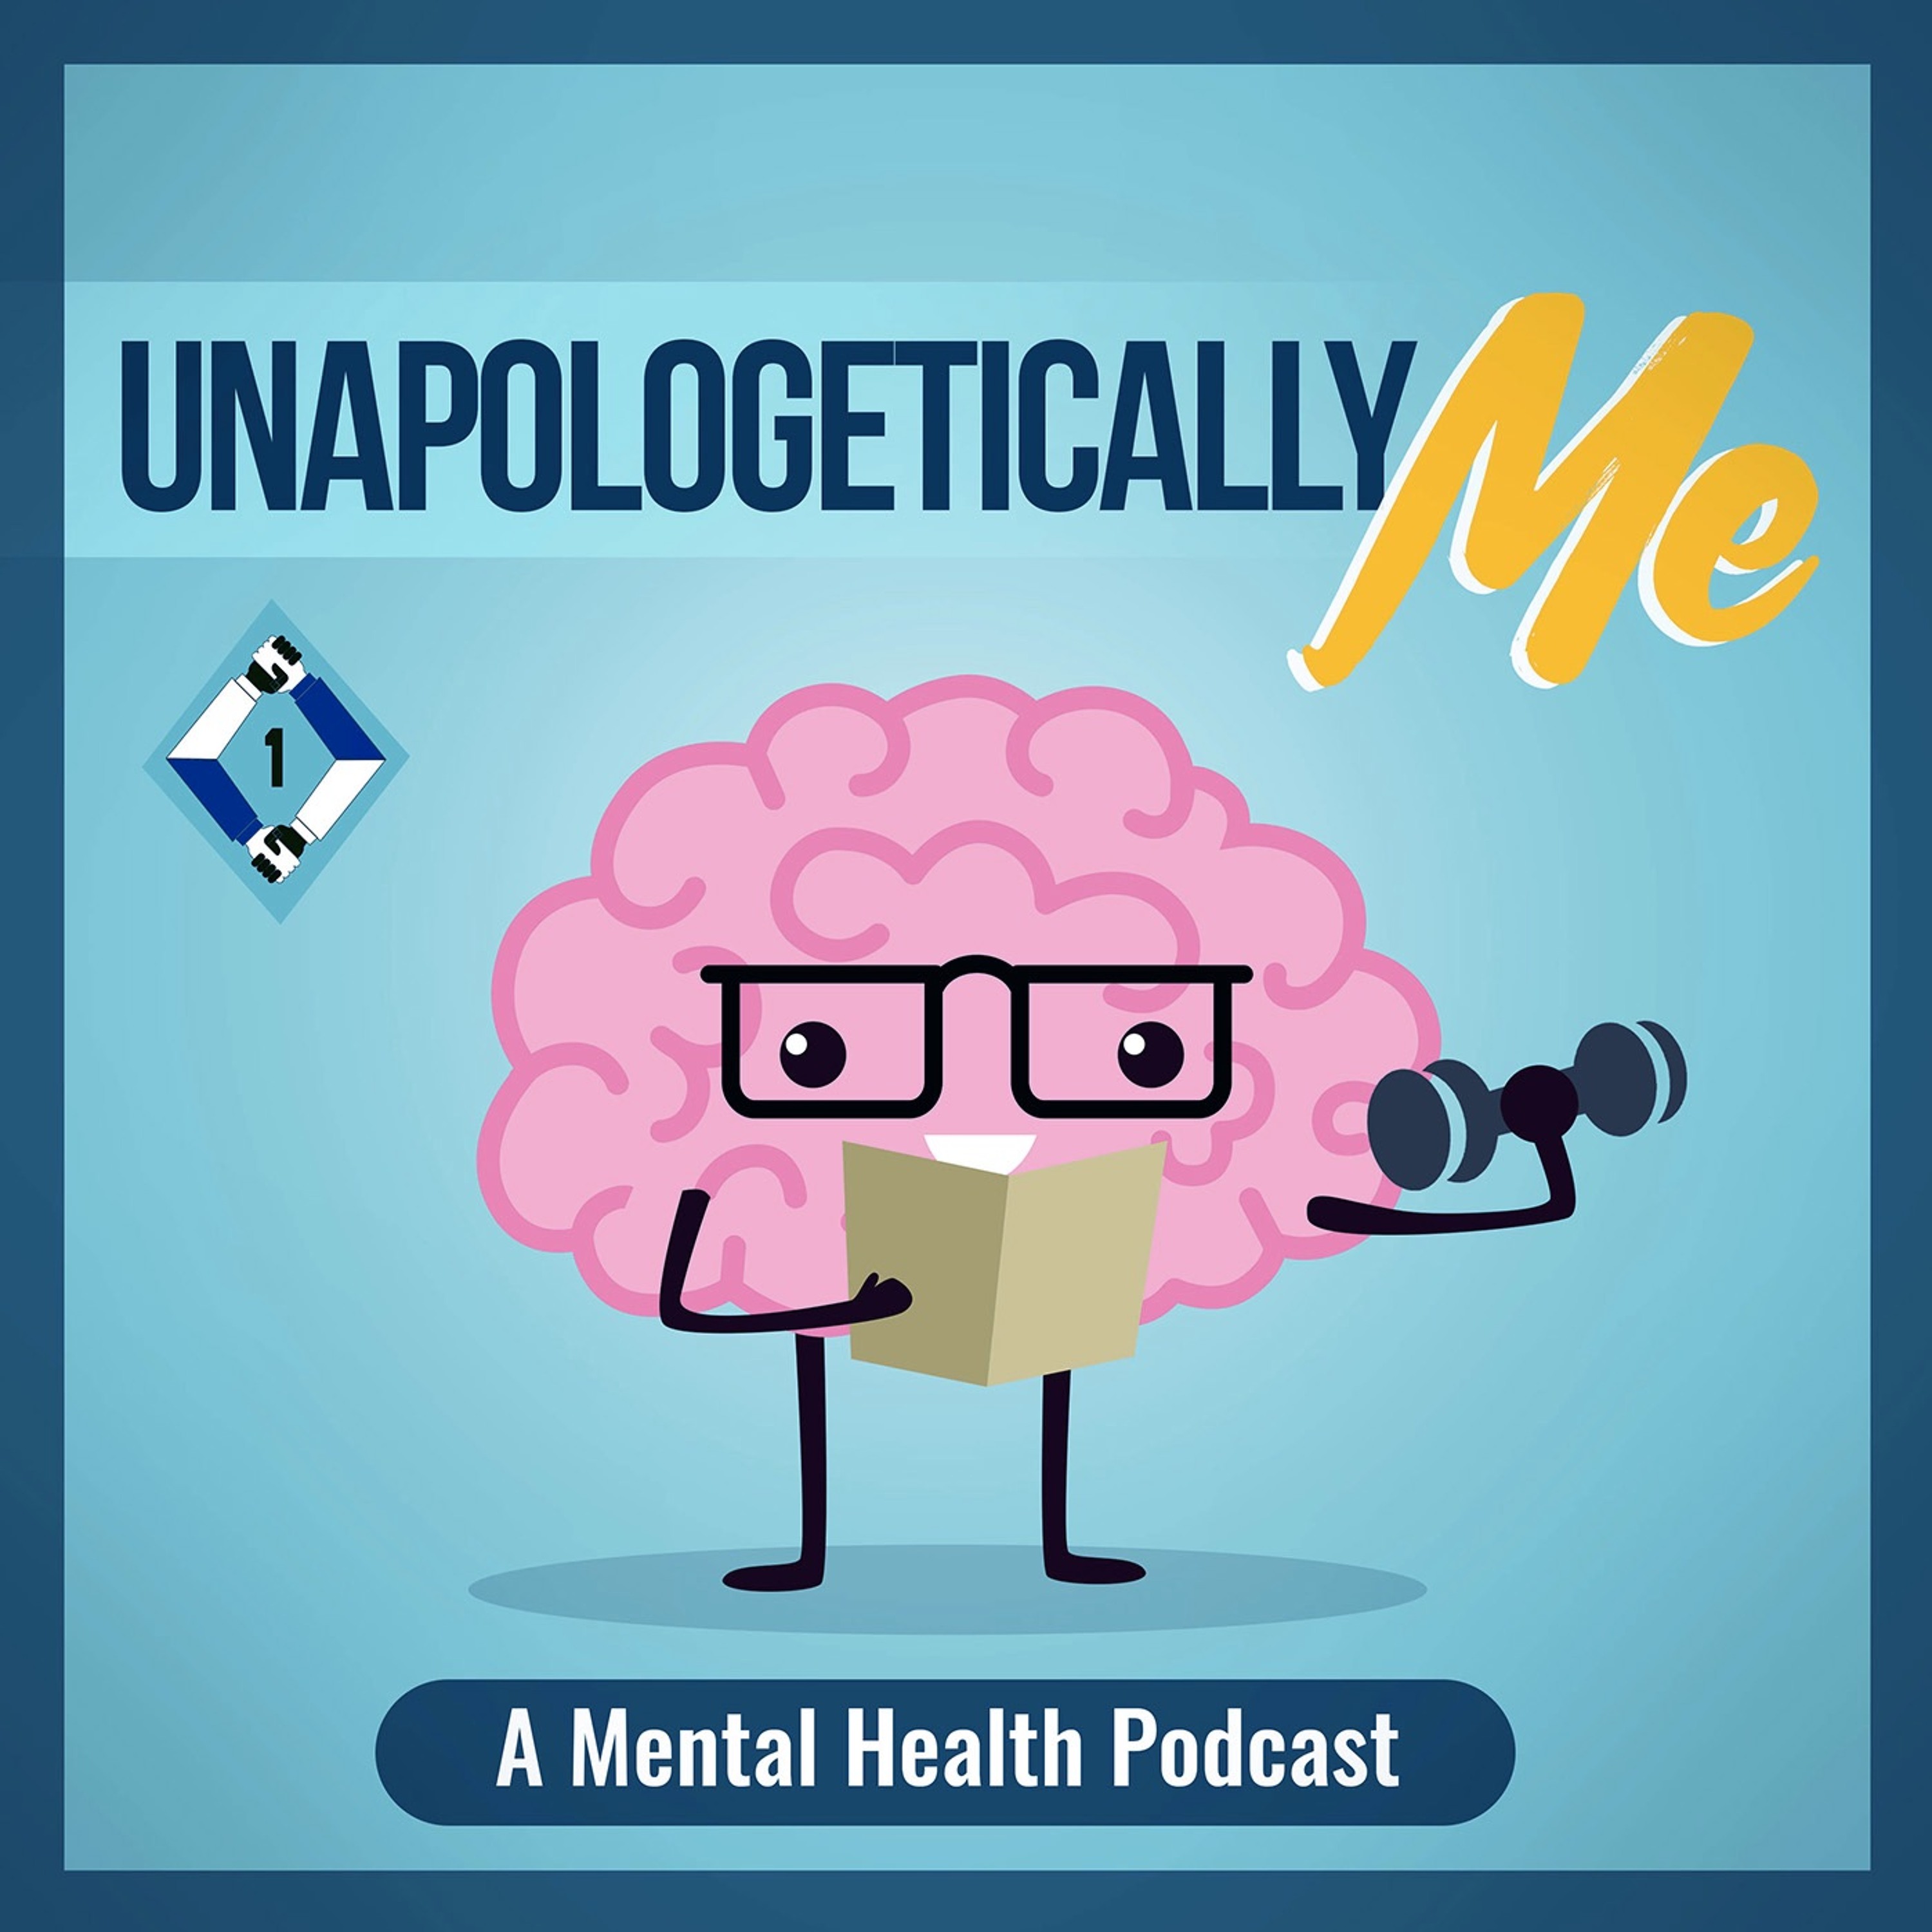 Unapologetically Me: A Mental Health Podcast - The Gratitude Challenge